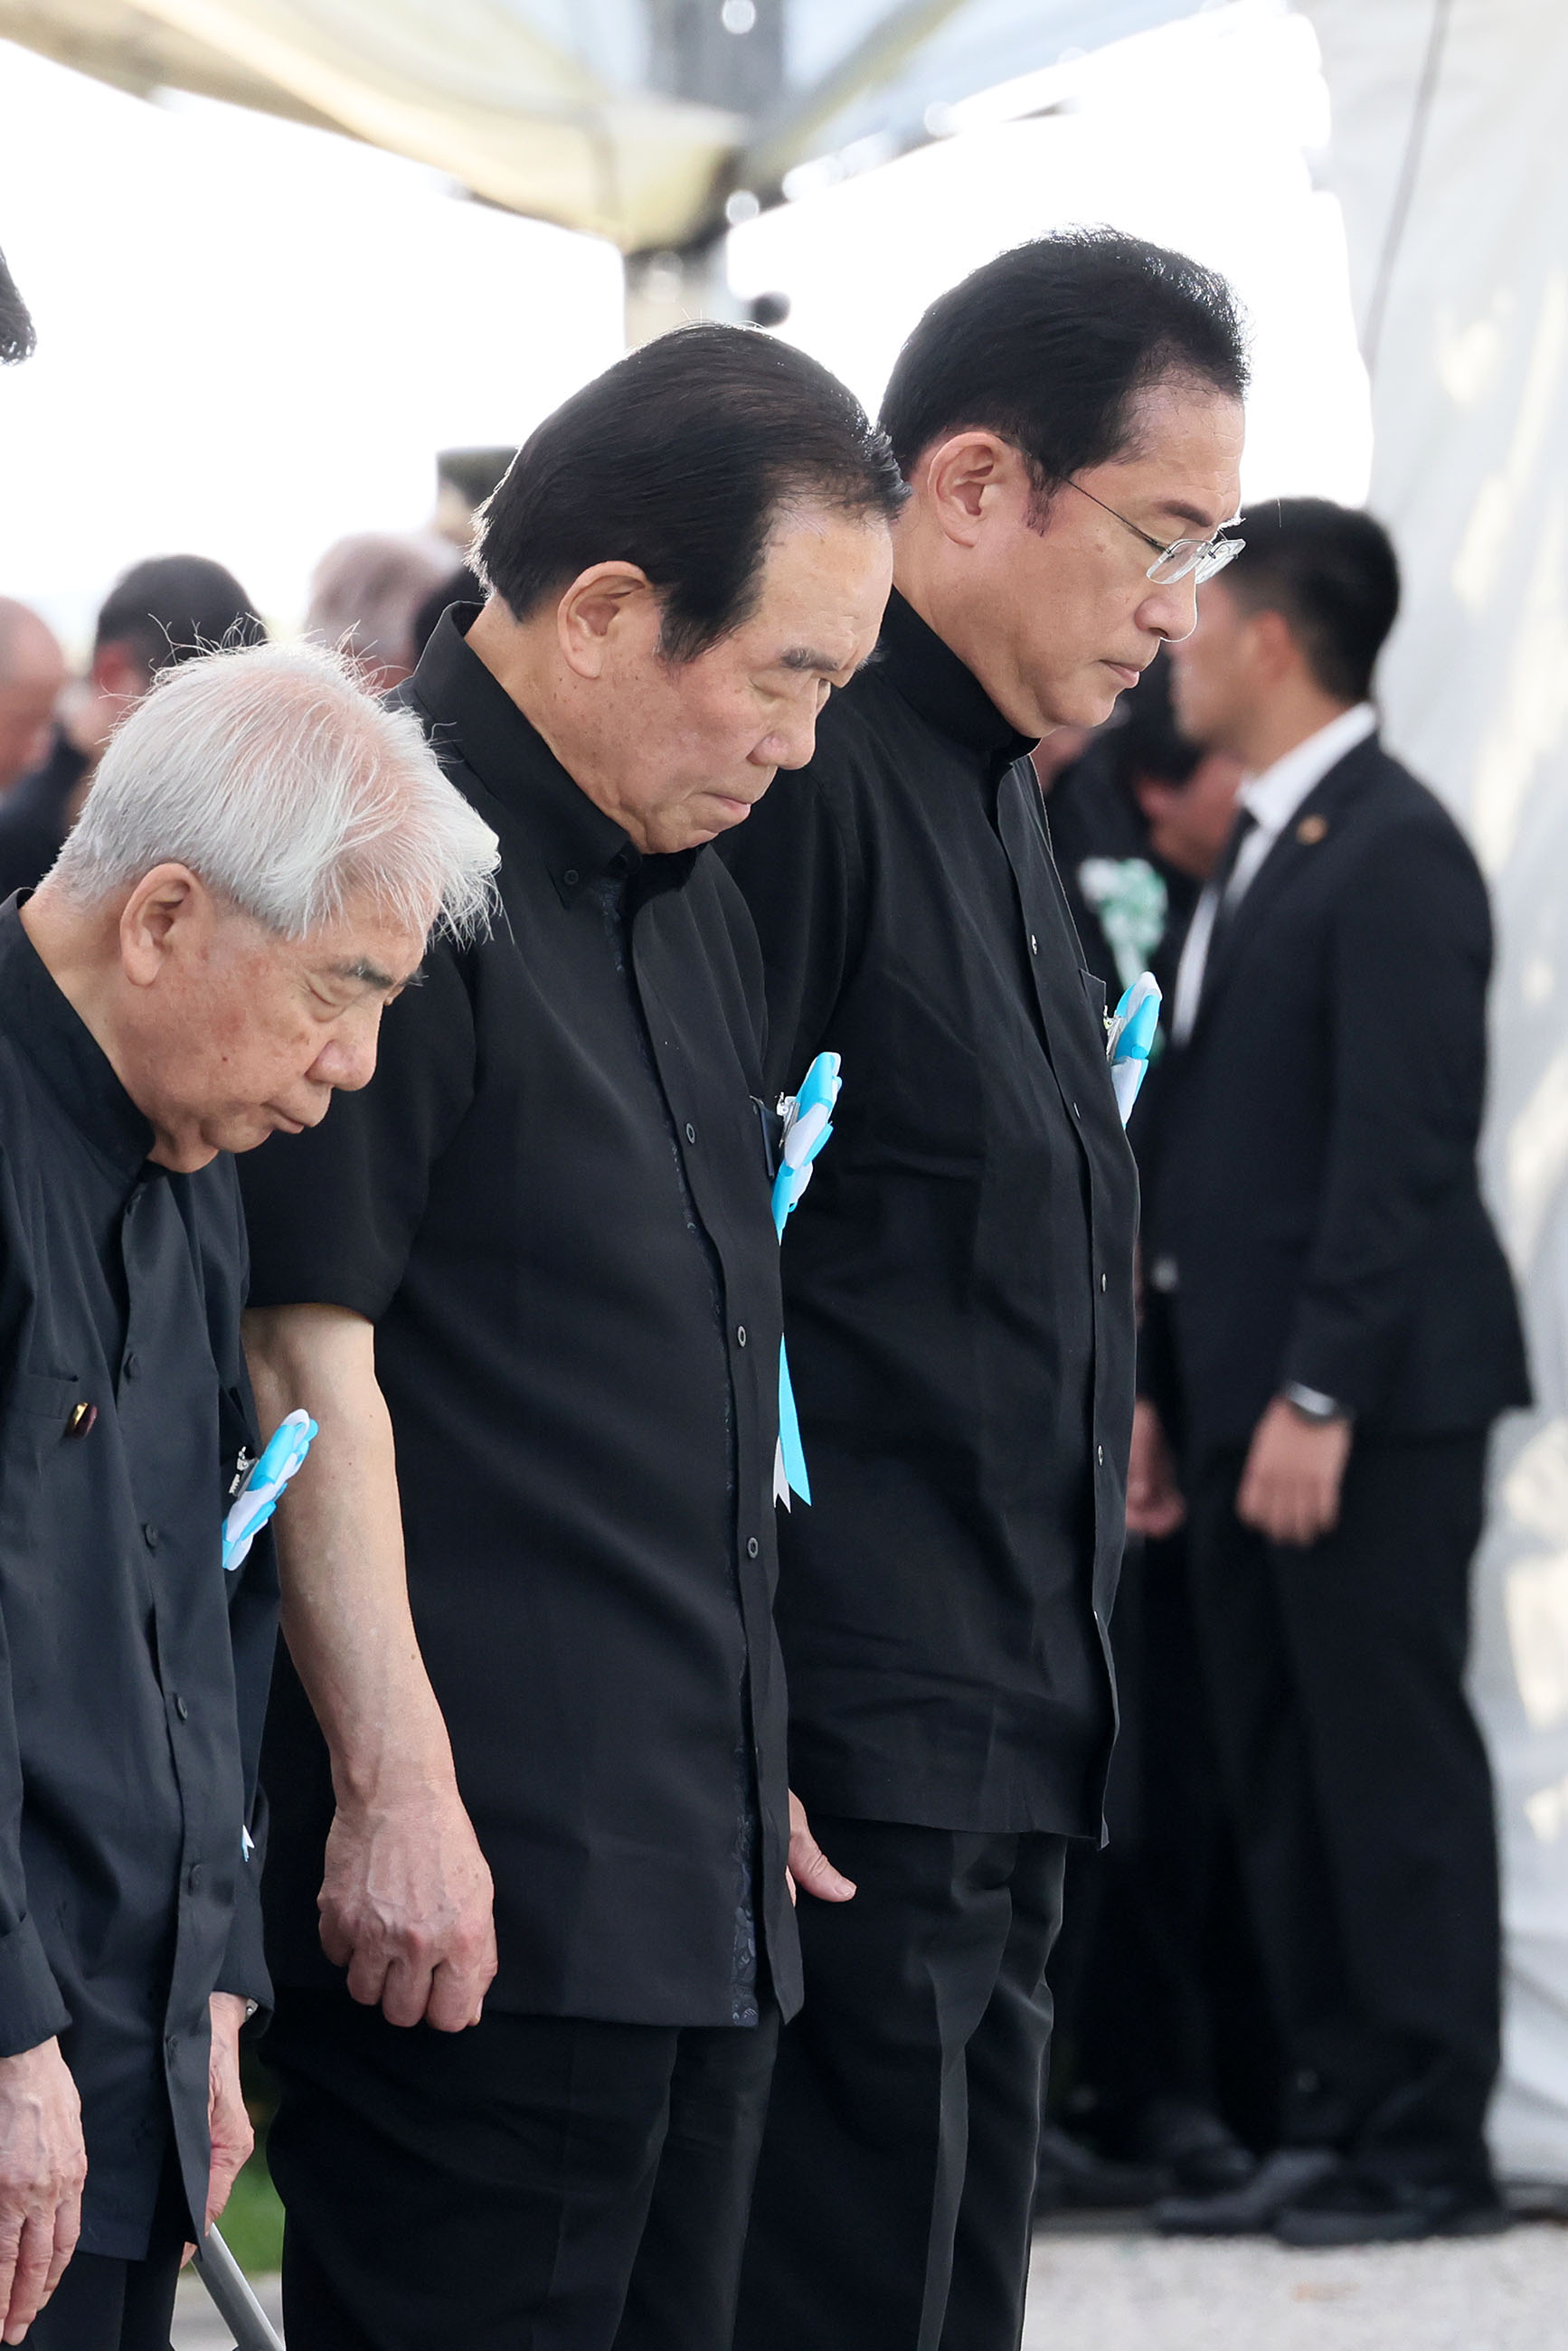 Photograph of the Prime Minister observing a moment of silence at the Memorial Ceremony to Commemorate the Fallen on the 79th Anniversary of the End of the Battle of Okinawa (2)